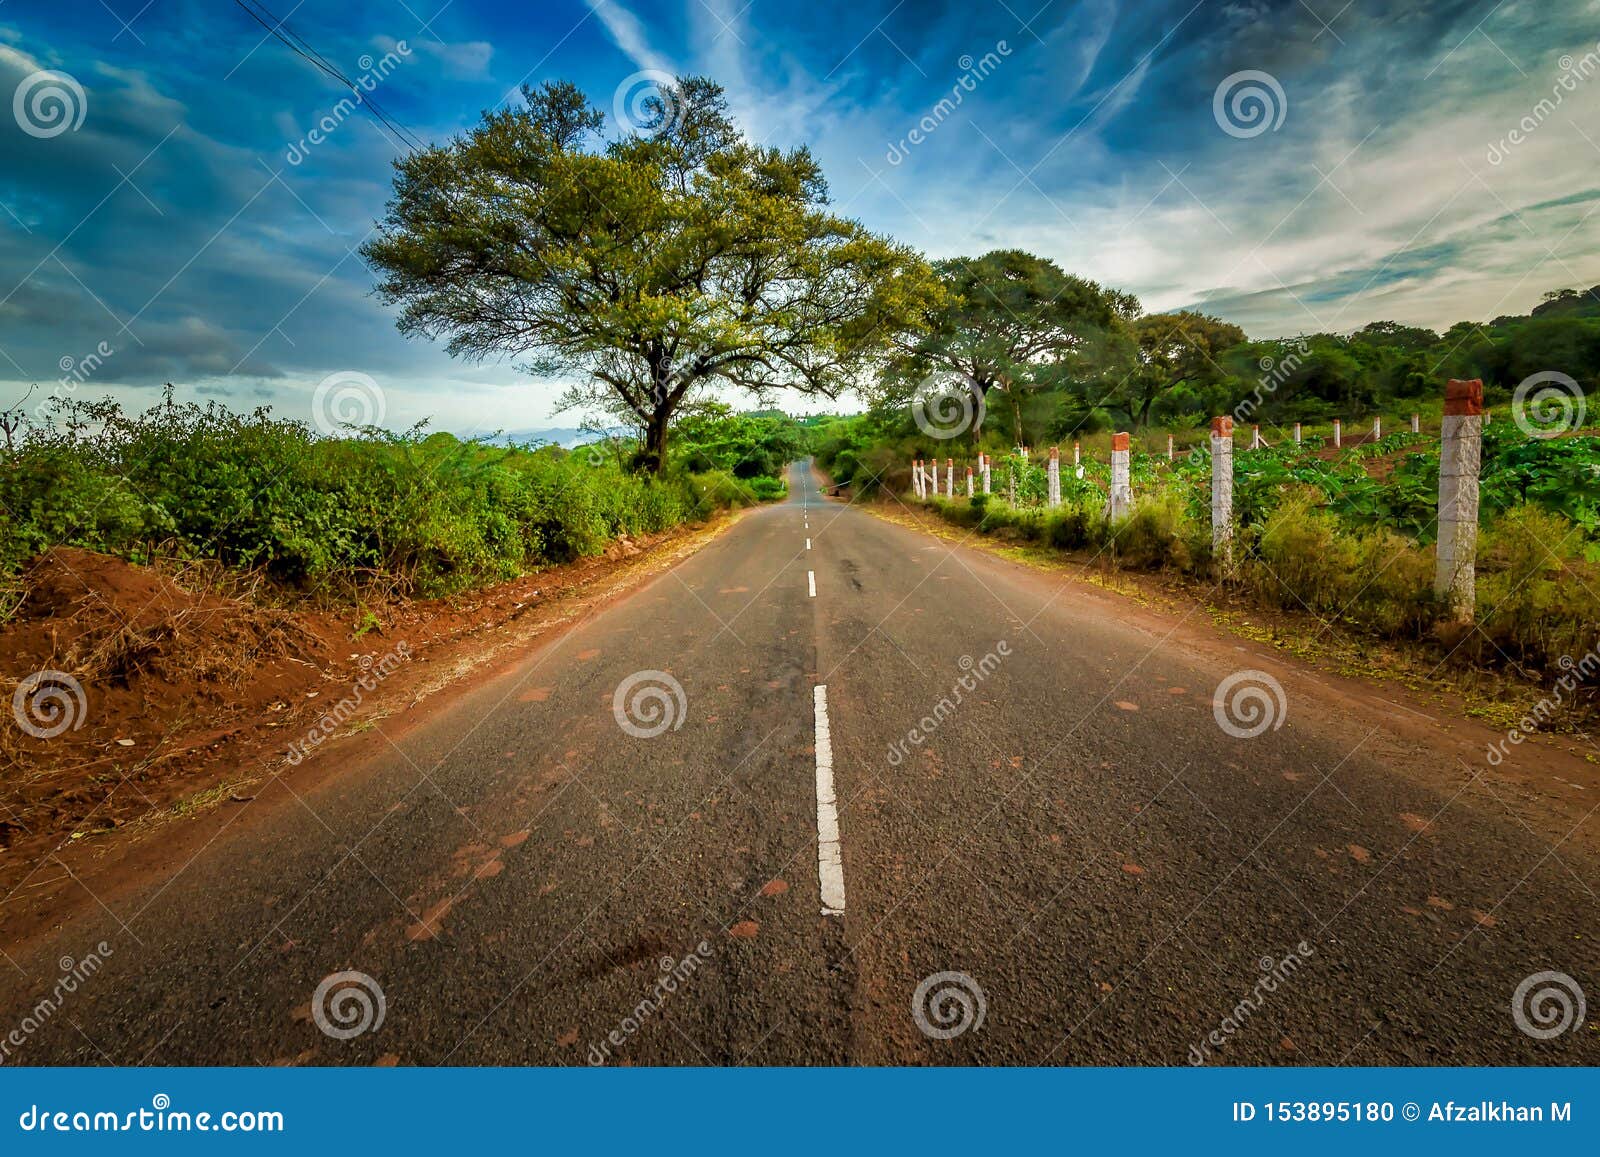 road with trees at both side- coimbatore tamil nadu india